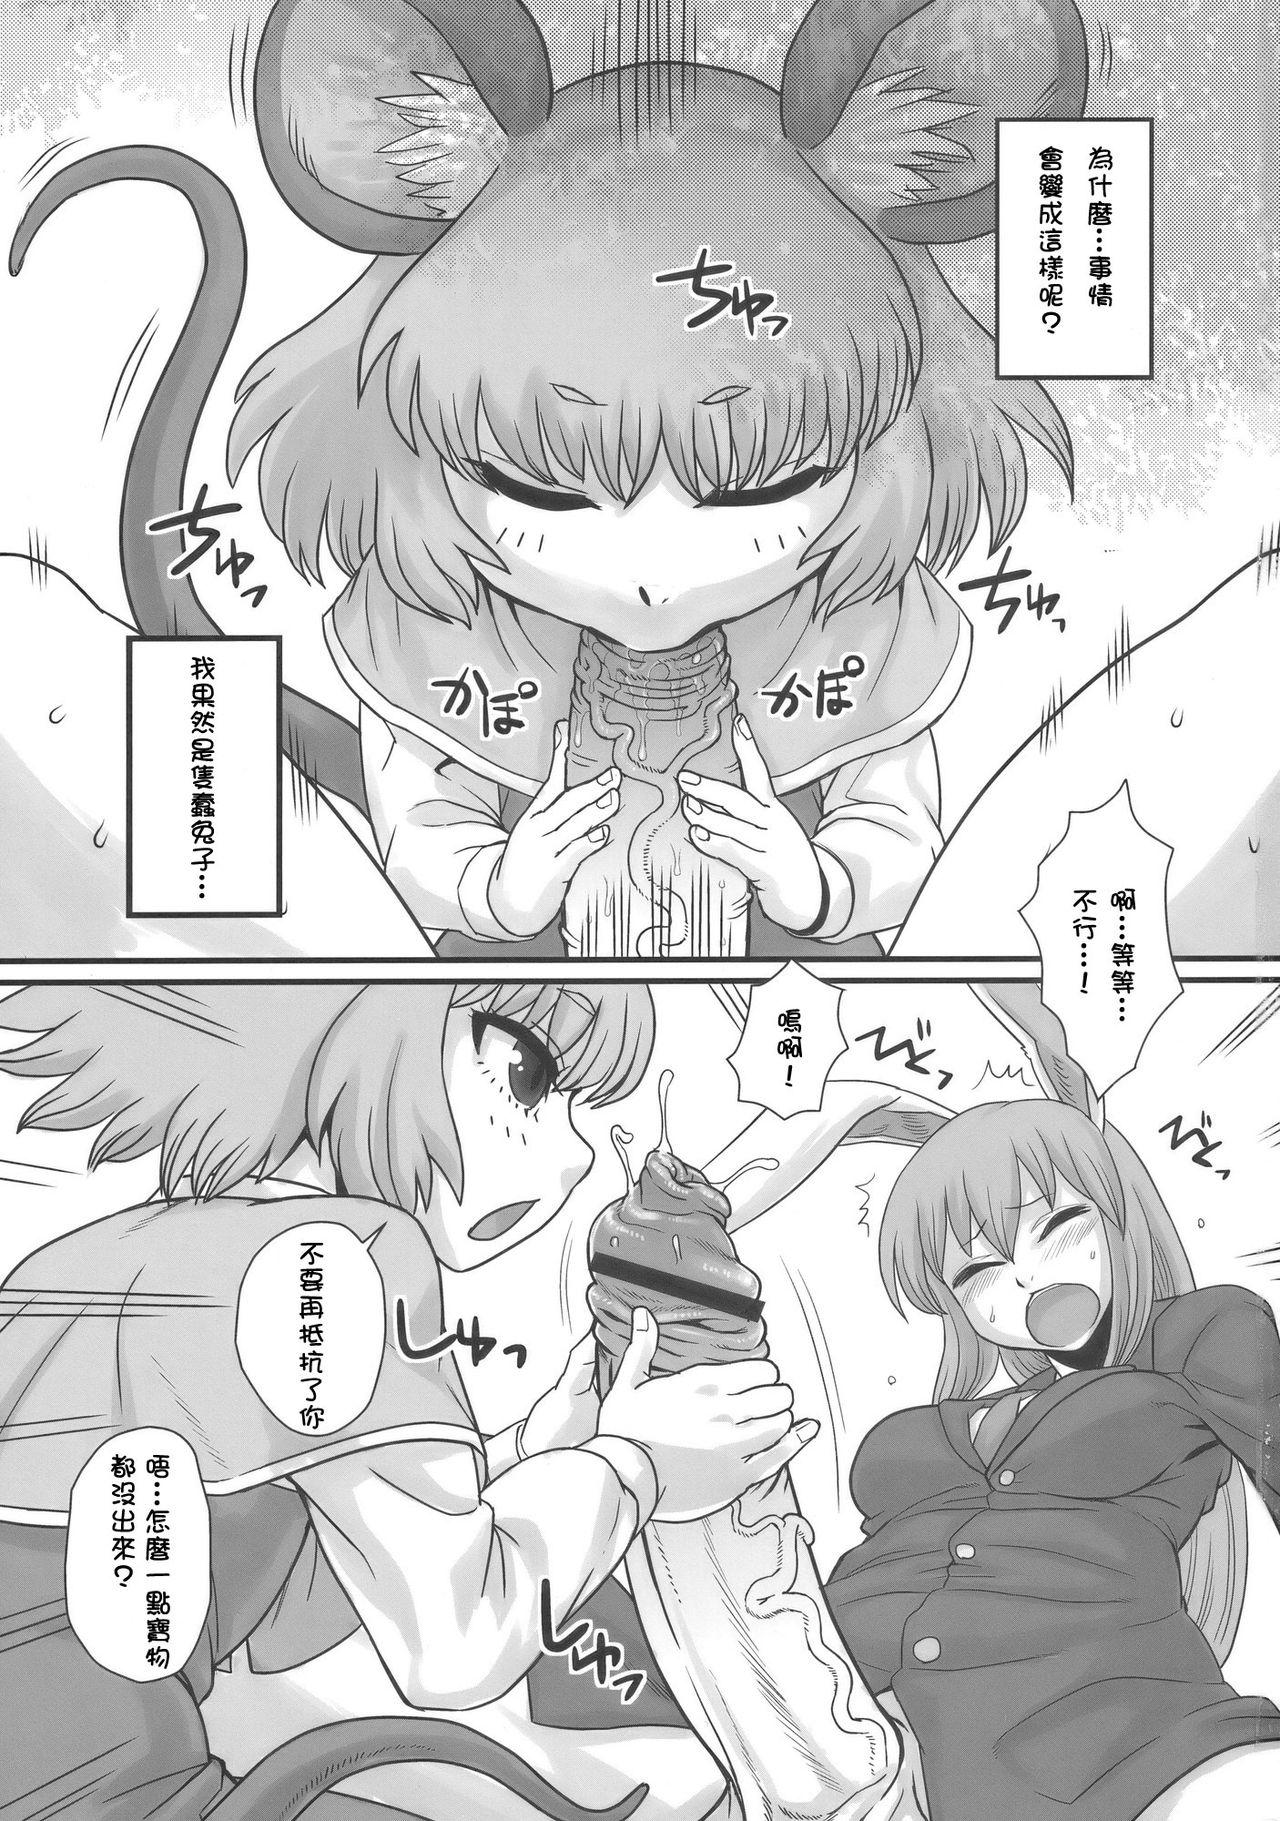 Orgasmo Lunatic Udon - Touhou project Sapphic Erotica - Page 3